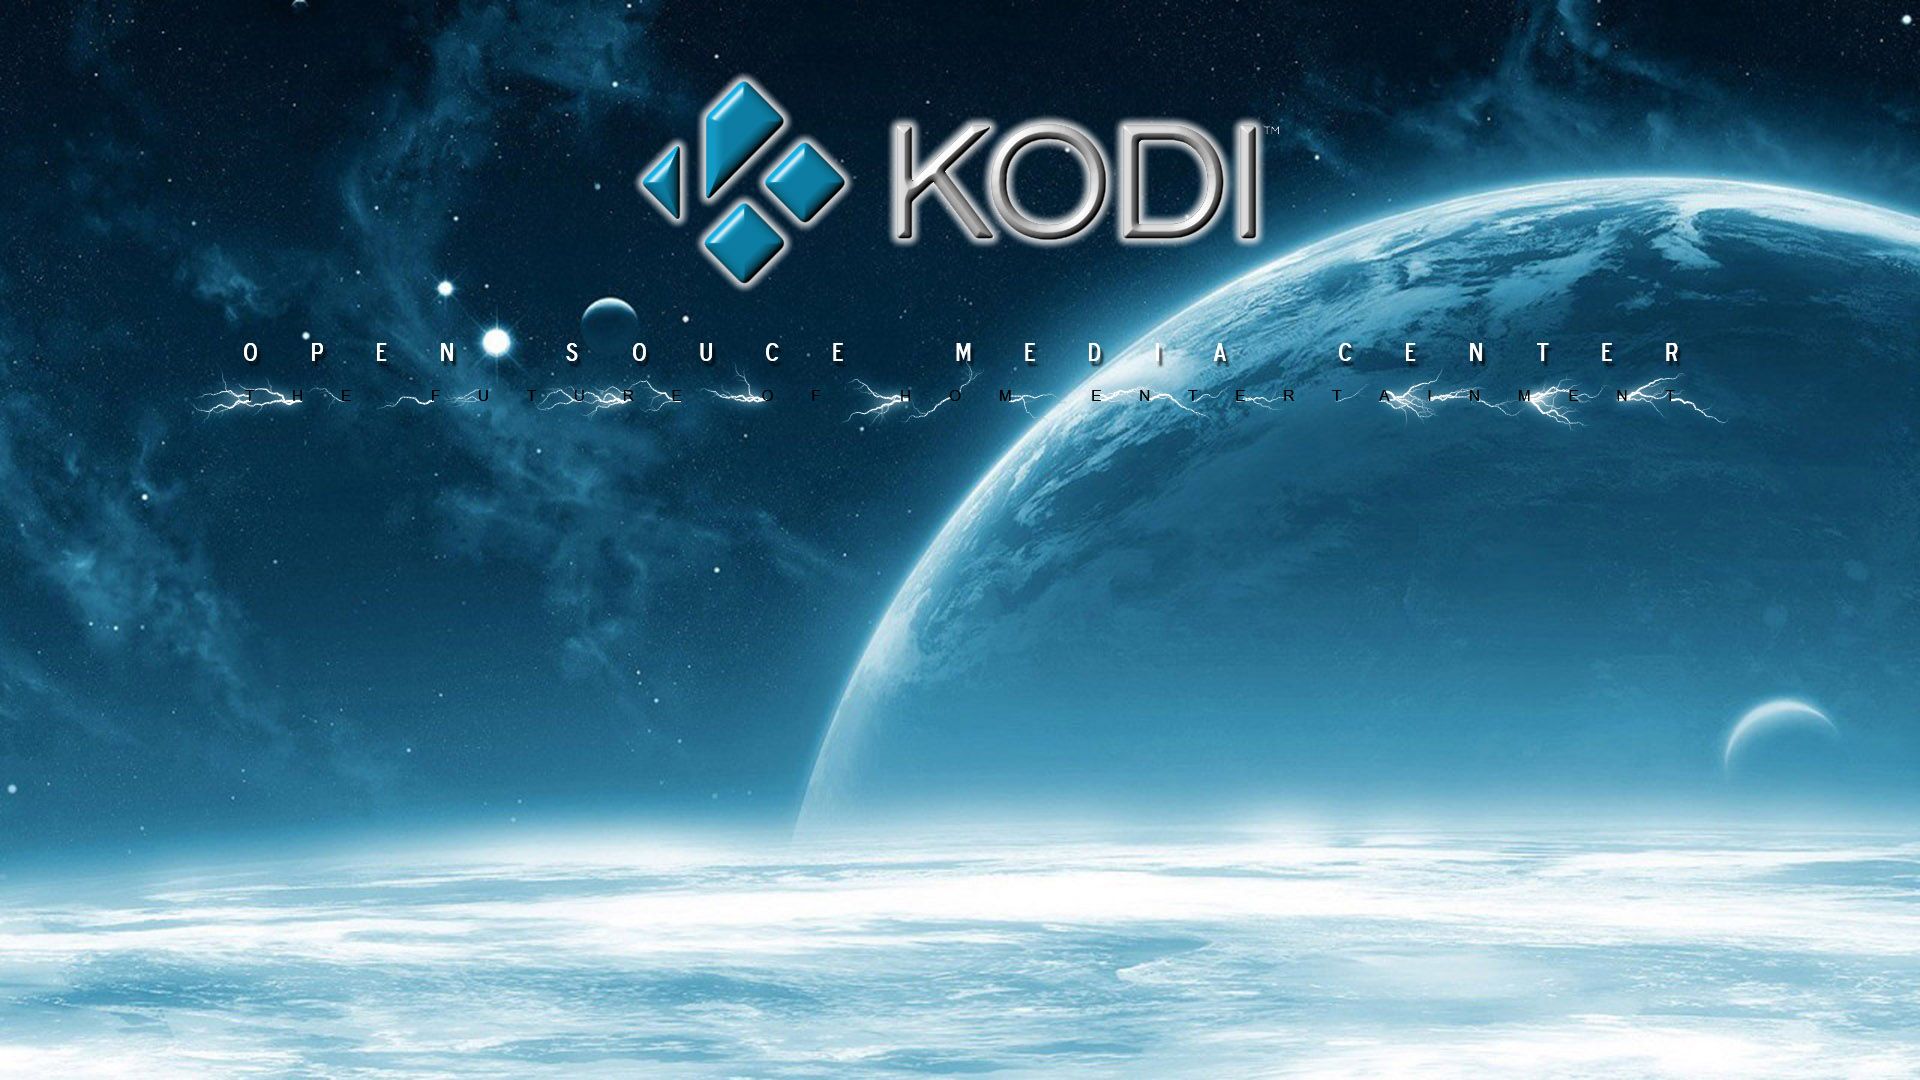 How To Set Up Kodi Media Center: Step By Step Visual Guide